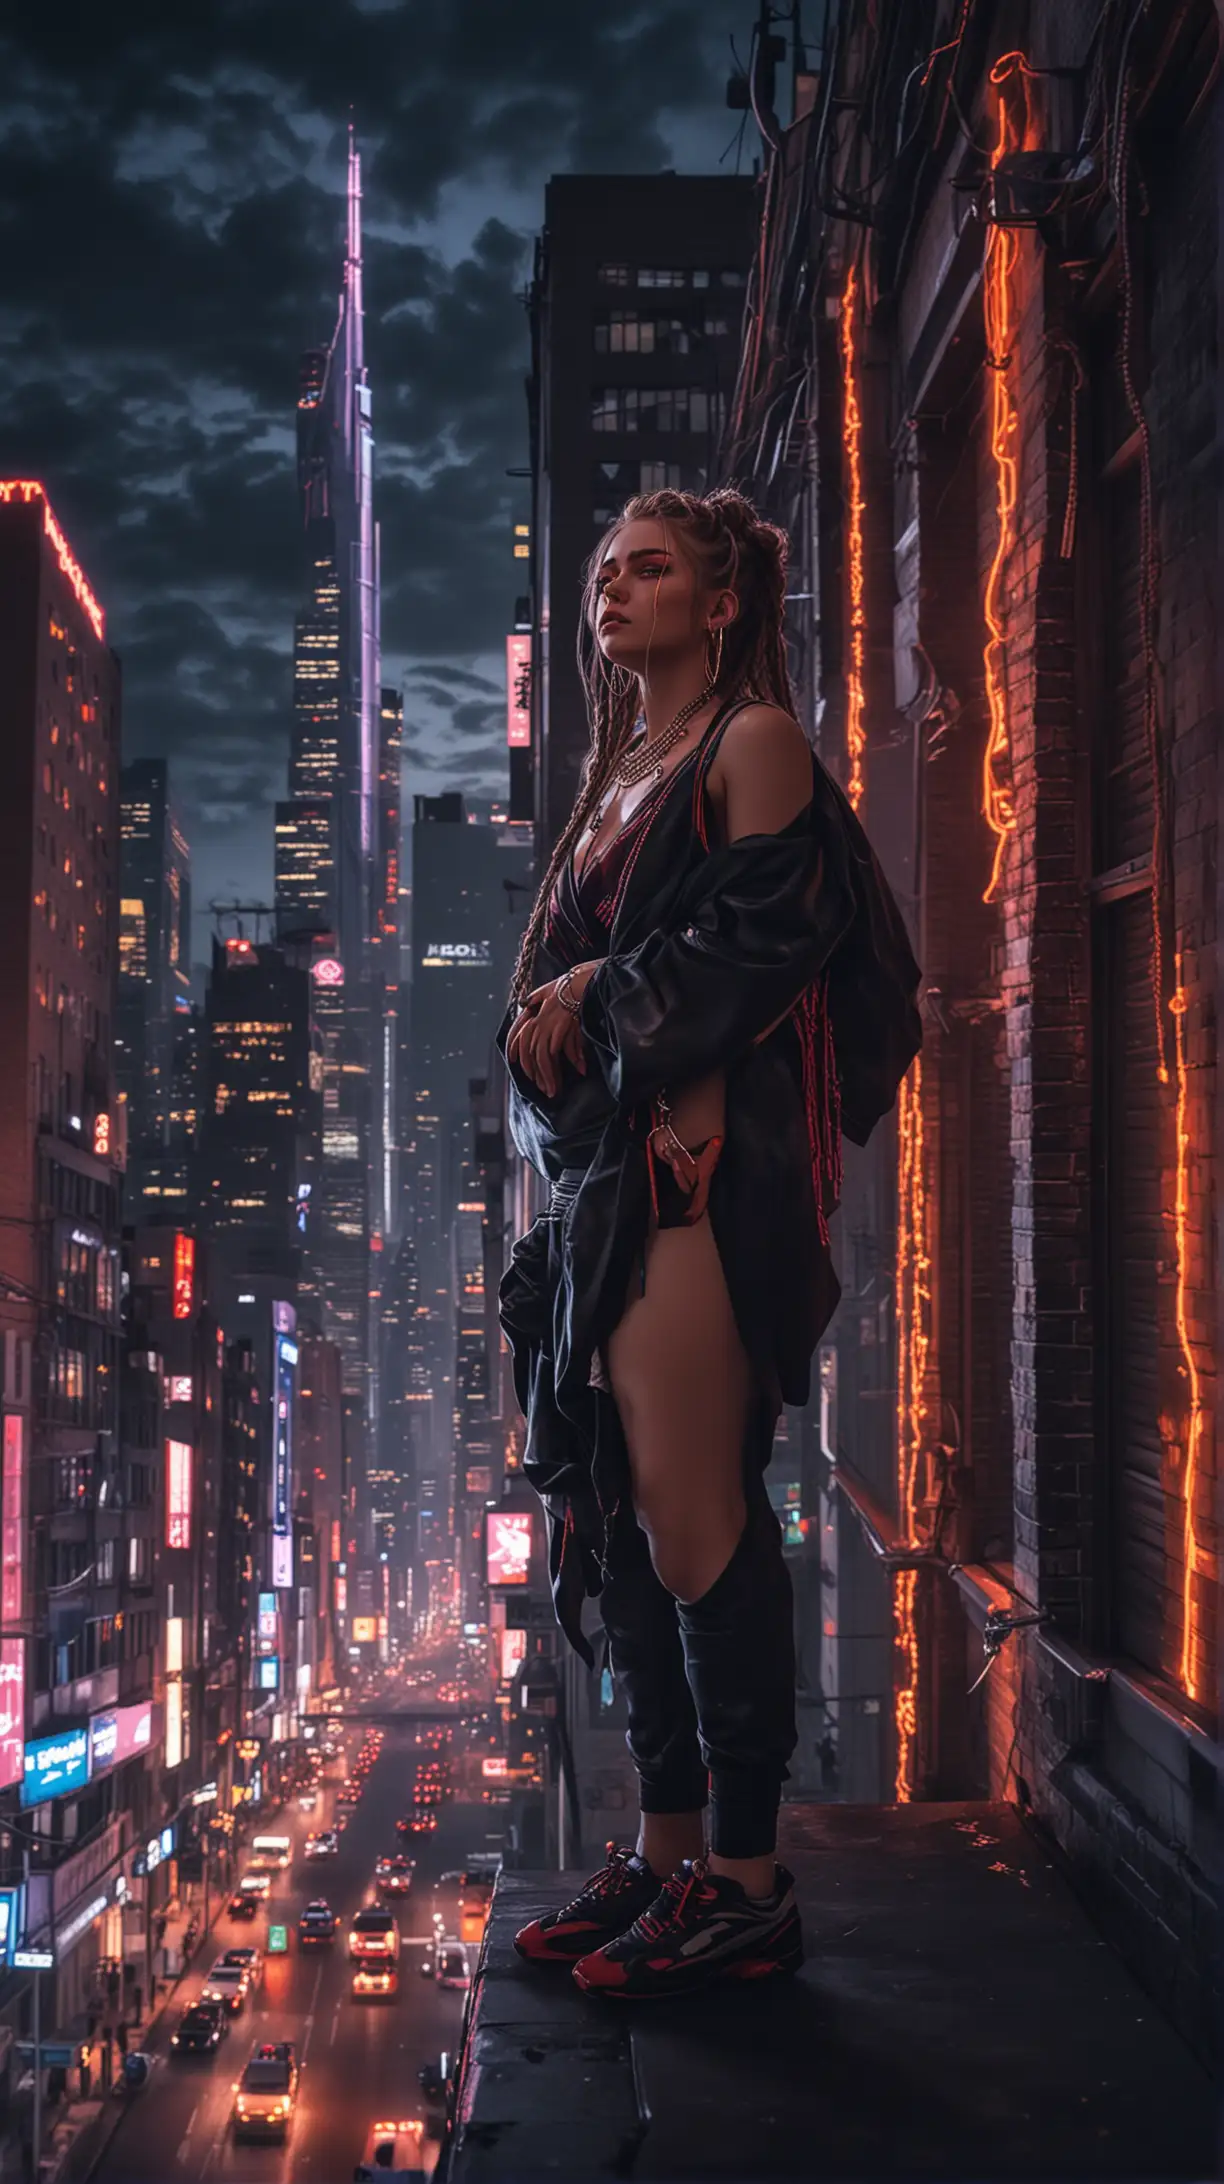 A vibrant and energetic image inspired by a trap song 'Plugg'. The scene shows a young Caucasian artist on top of a building in a modern city with braided hair, lit up by neon lights. Wearing designer clothes and flashy jewelry, highlighting his success. In the background, a luxury McLaren and high-end stores represent his material achievements. The sky is dark, but the environment is illuminated with intense colors, creating a dramatic contrast that reflects the darkness and the flame of the artist. Eyes like Mangekyo Sharingan, symbolizing his strength and unique vision. The style of the image should be a mix of realism with anime touches